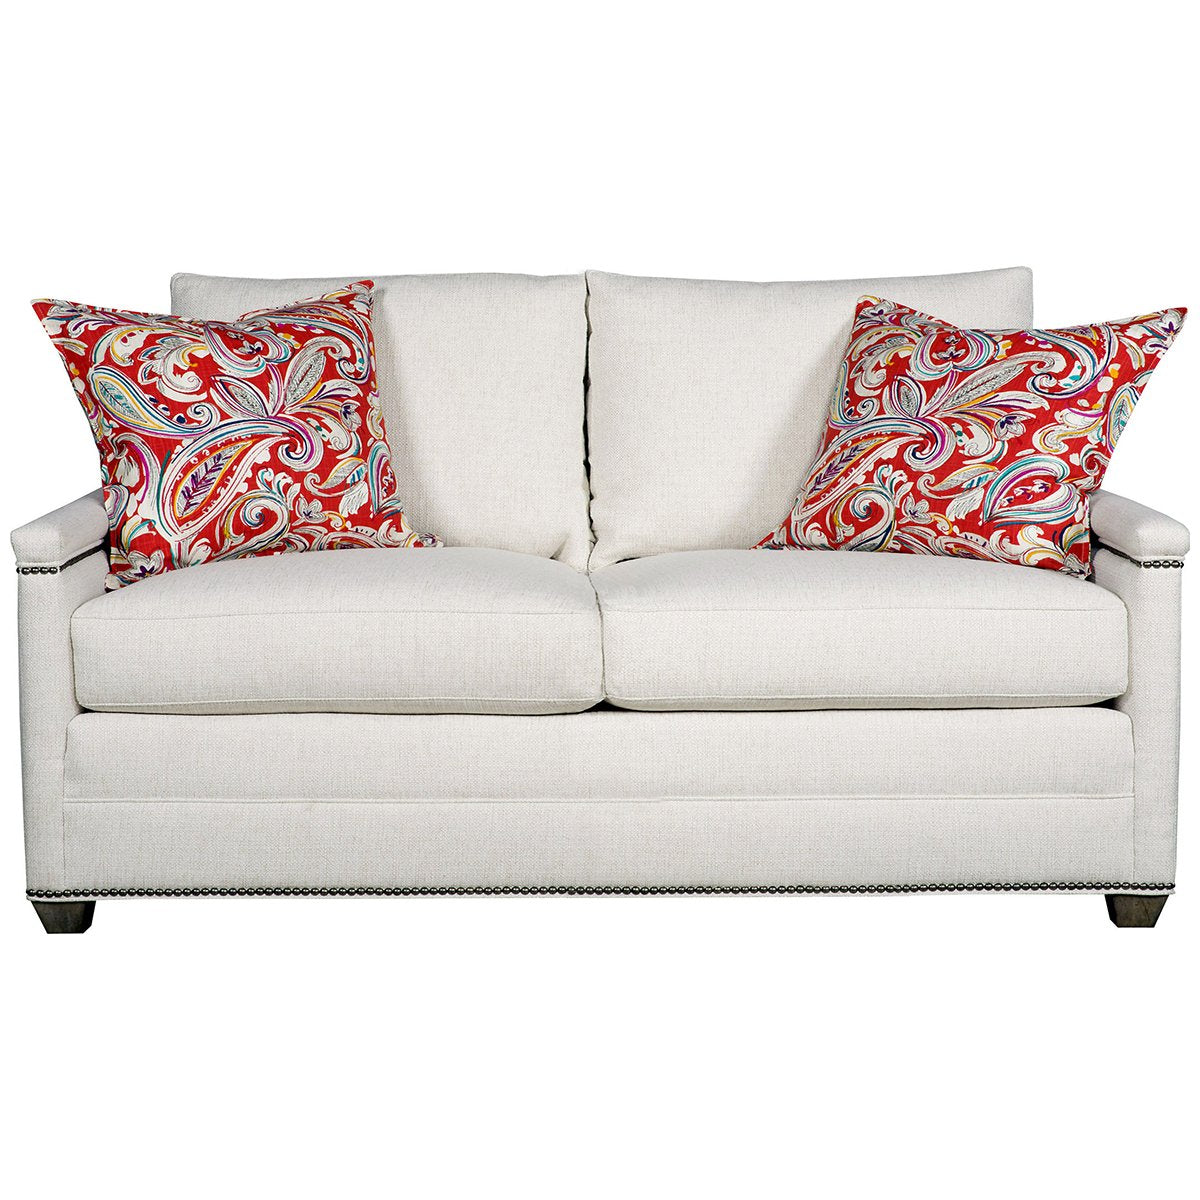 Vanguard Furniture Connelly Springs Loveseat